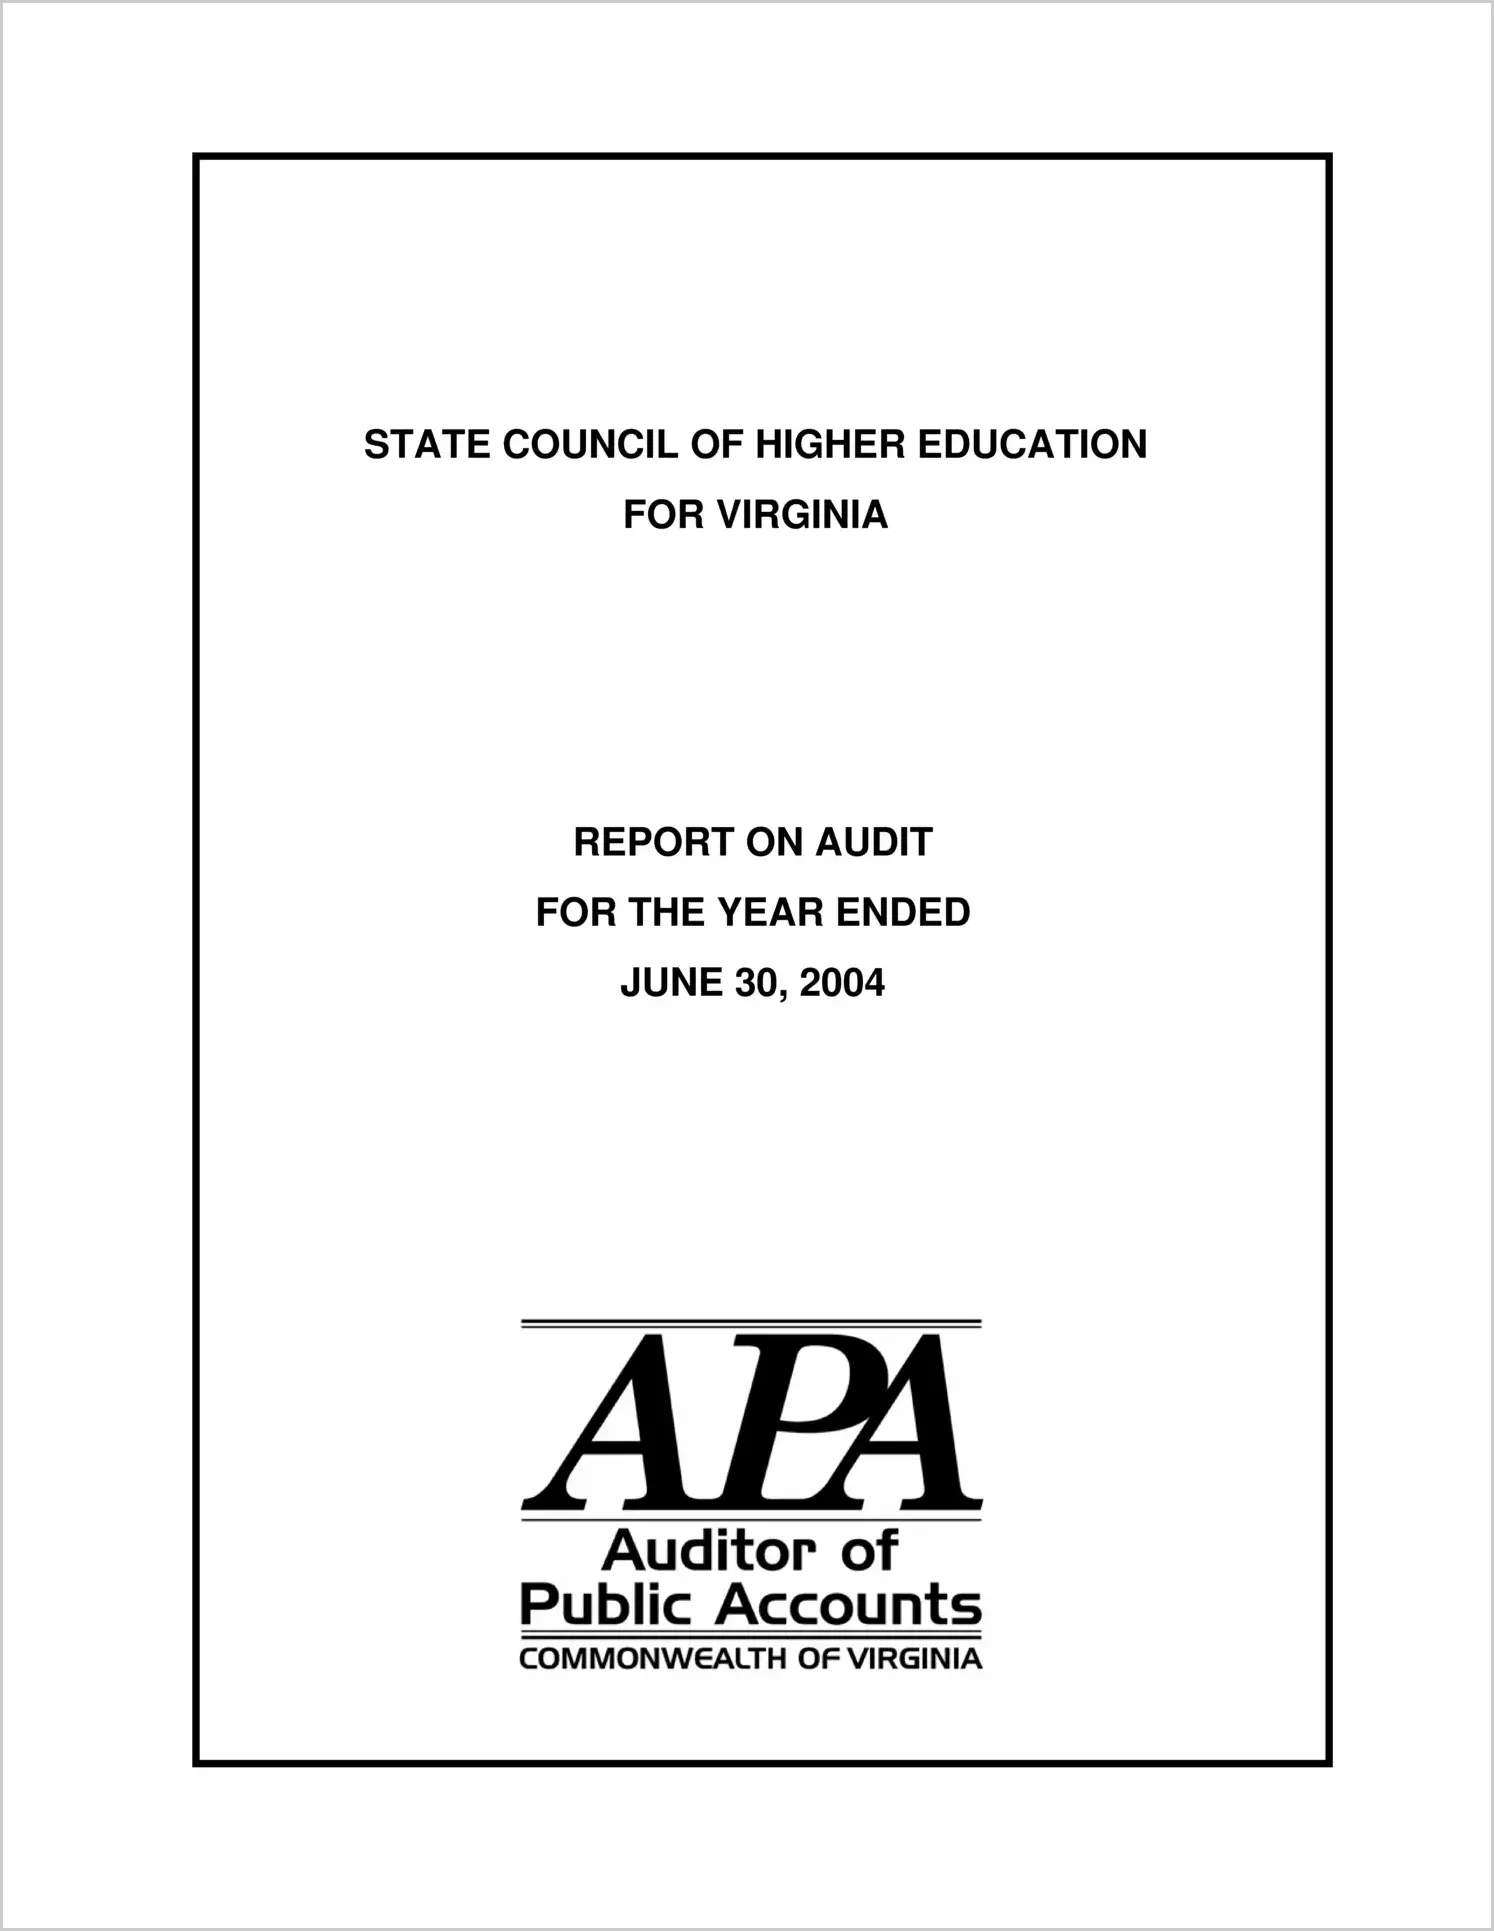 State Council of Higher Education for Virginia for the two year period ended June 30, 2004